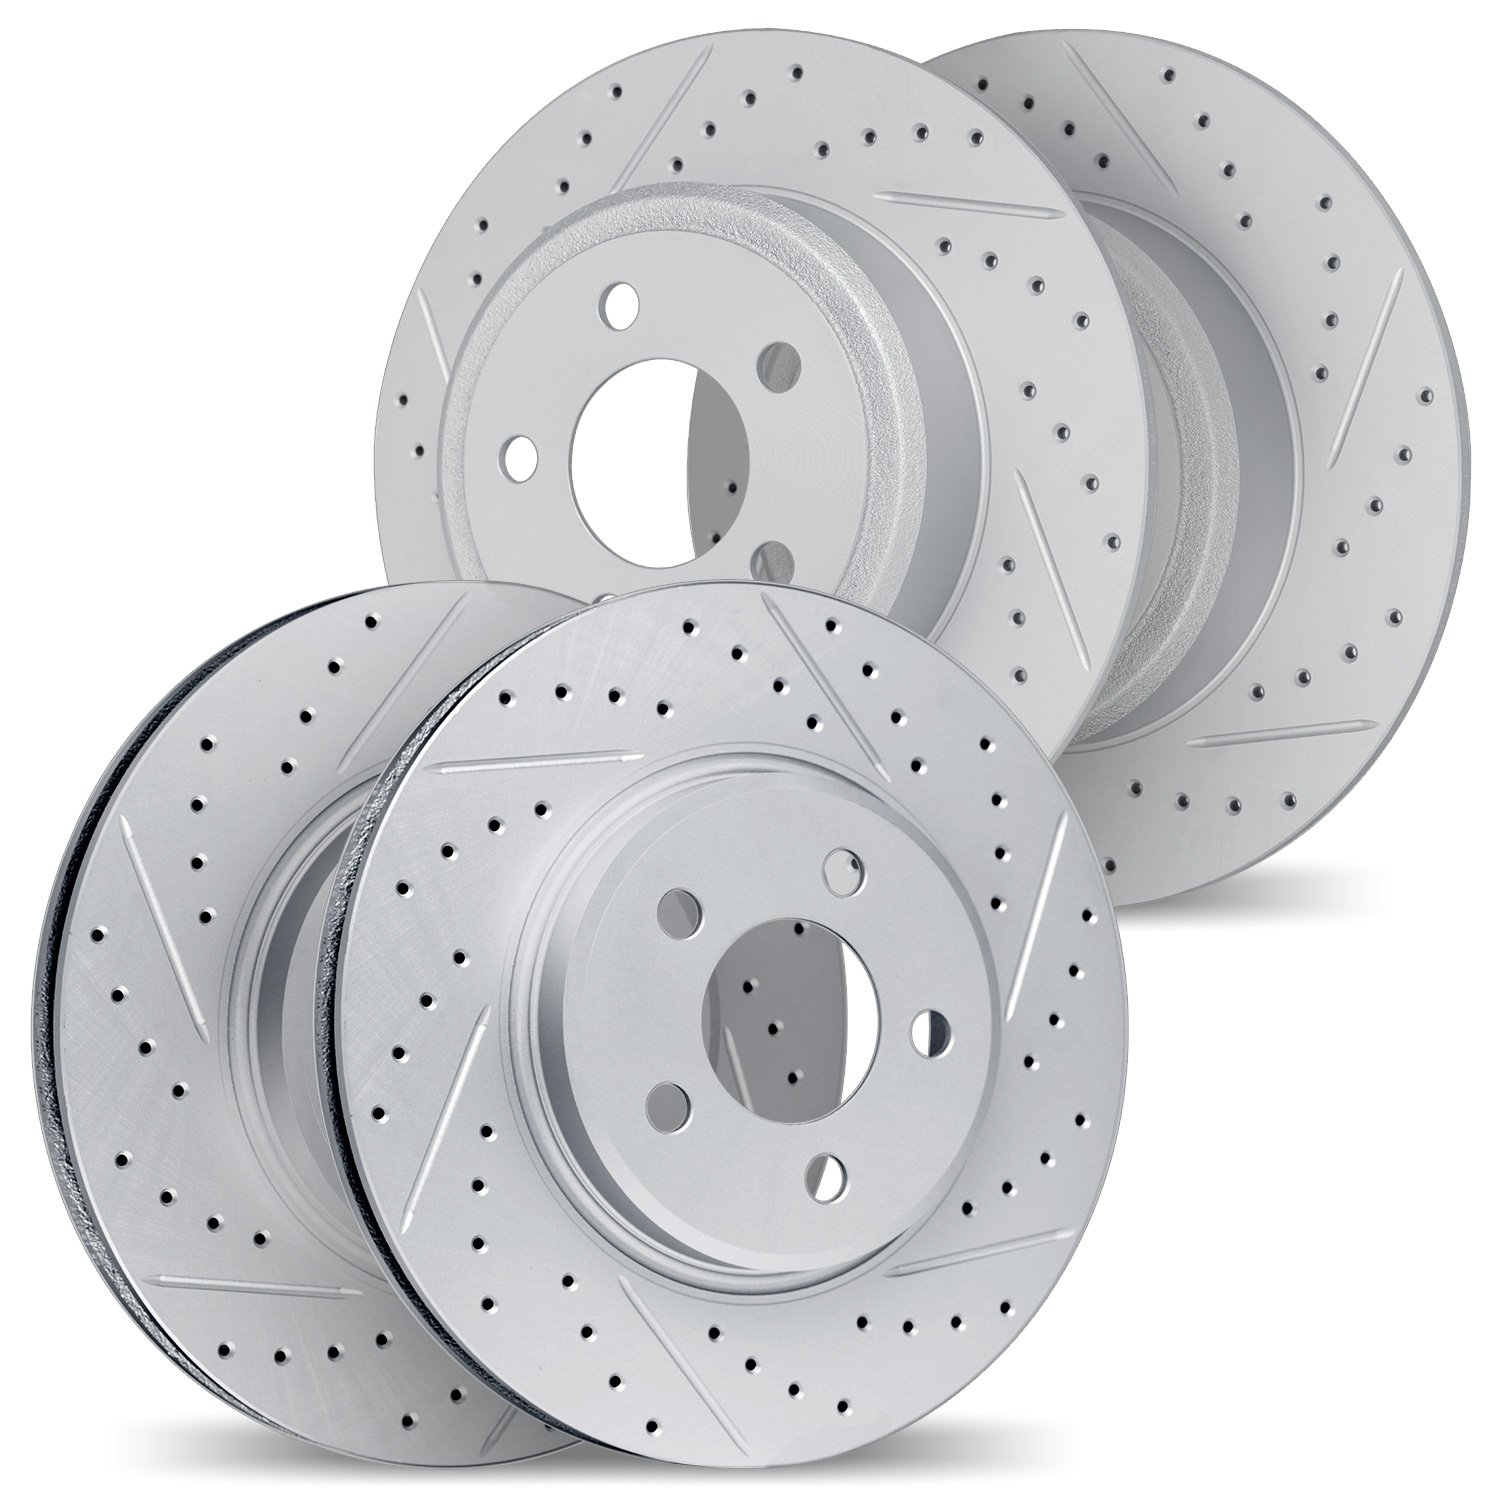 2004-27027 Geoperformance Drilled/Slotted Brake Rotors, Fits Select Volvo, Position: Front and Rear